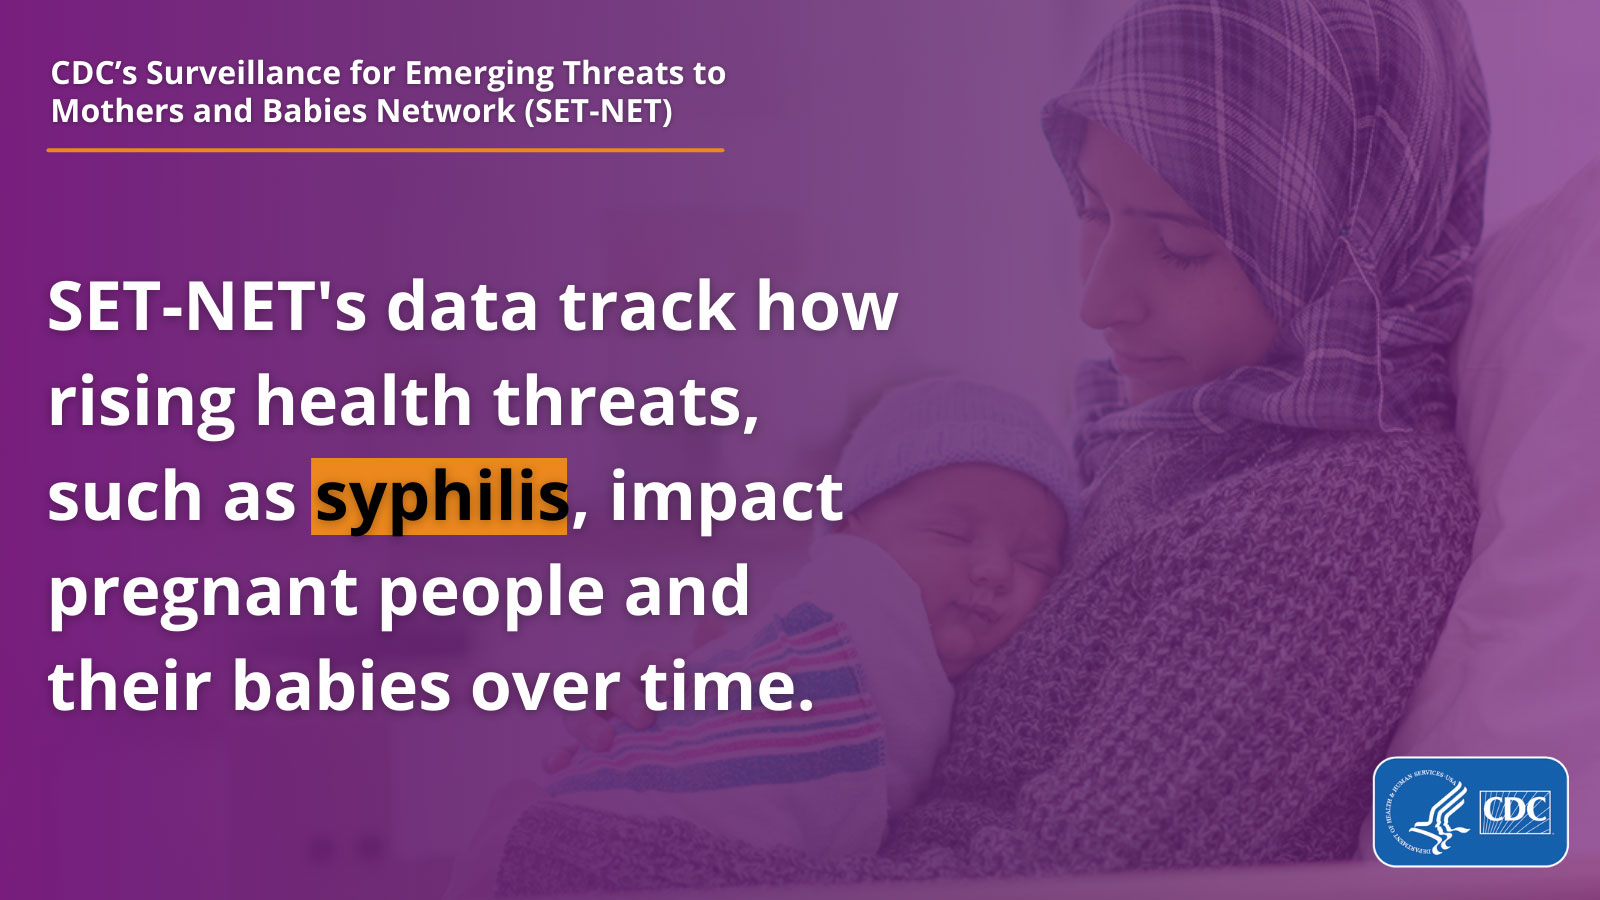 SET-NET's data track how rising health threats, such as syphilis, impact pregnant people and their babies over time.